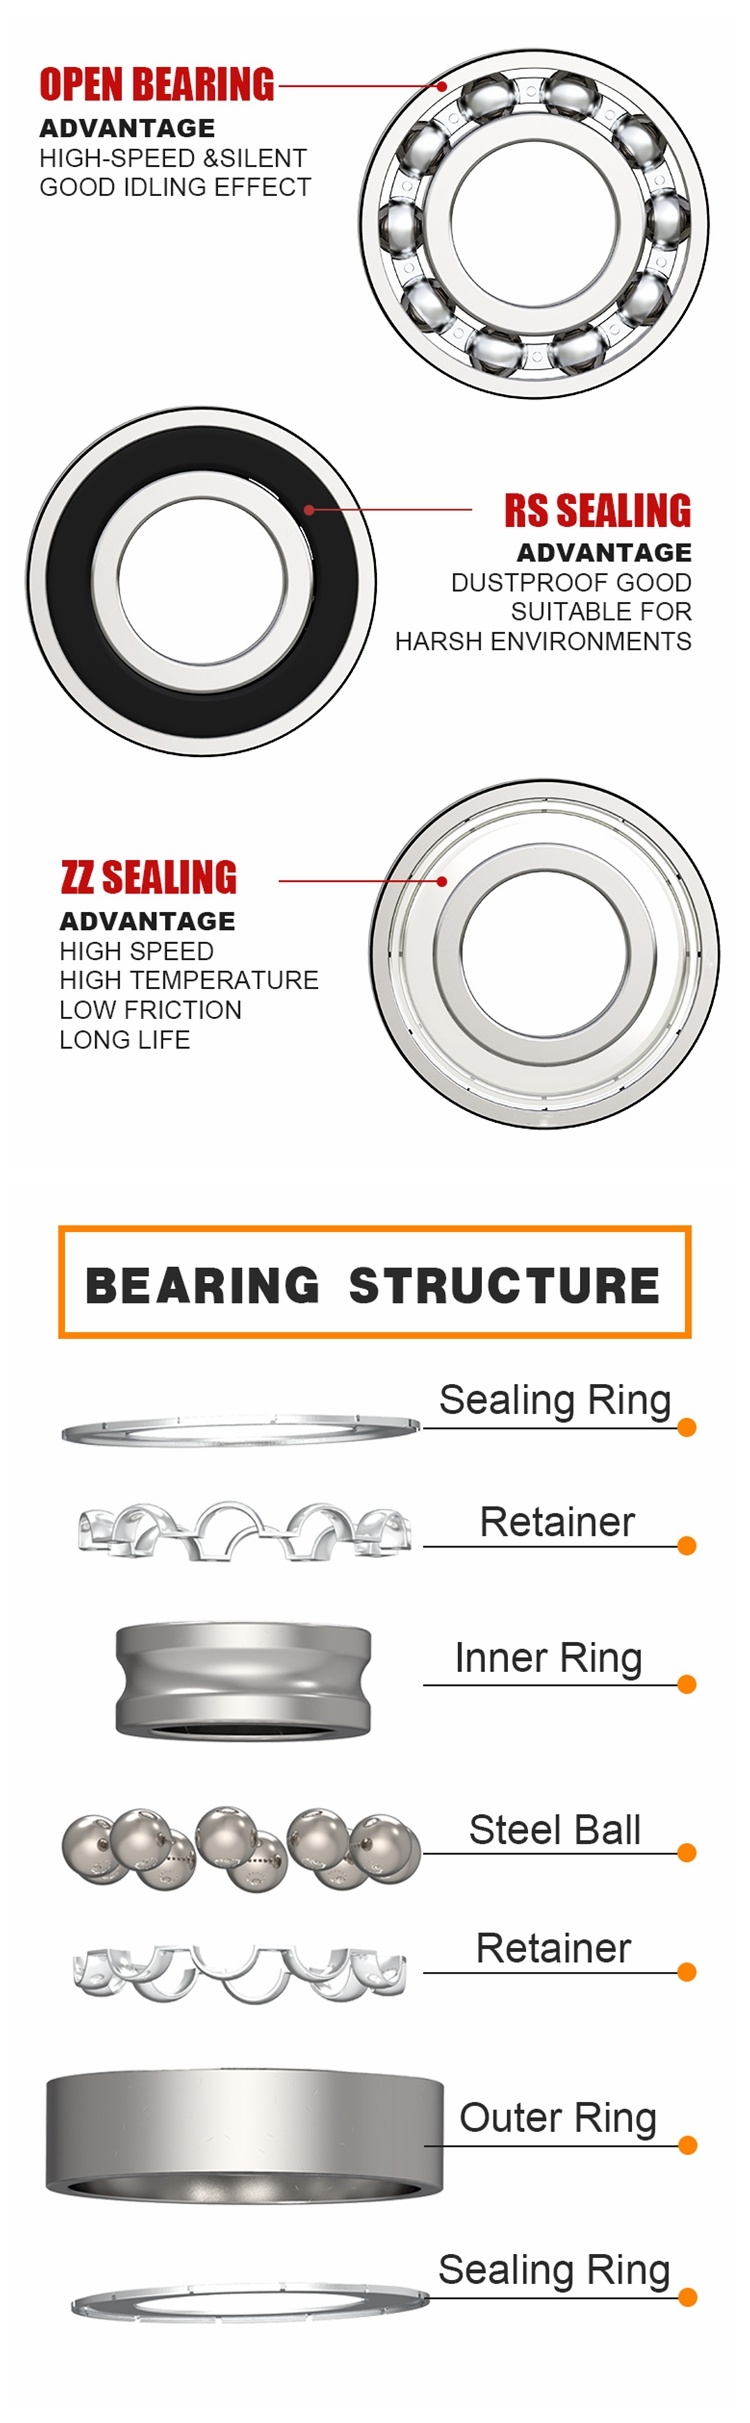 Motor Clearance Spindle Bearing Rubber Cover 6709 Zz Ball Bearings